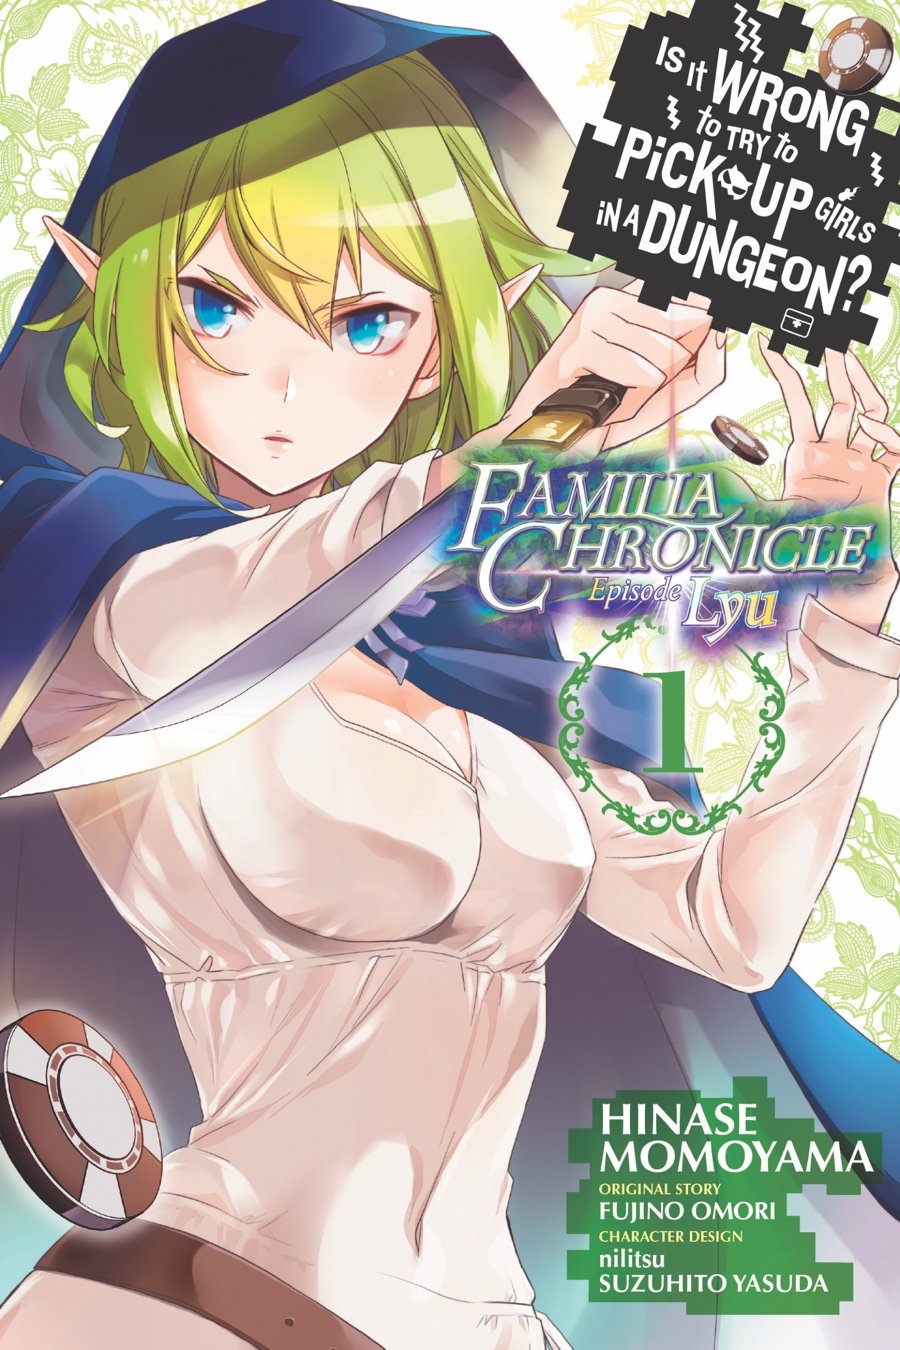 Is It Wrong to Try to Pick Up Girls in a Dungeon? Familia Chronicle, Vol. 1